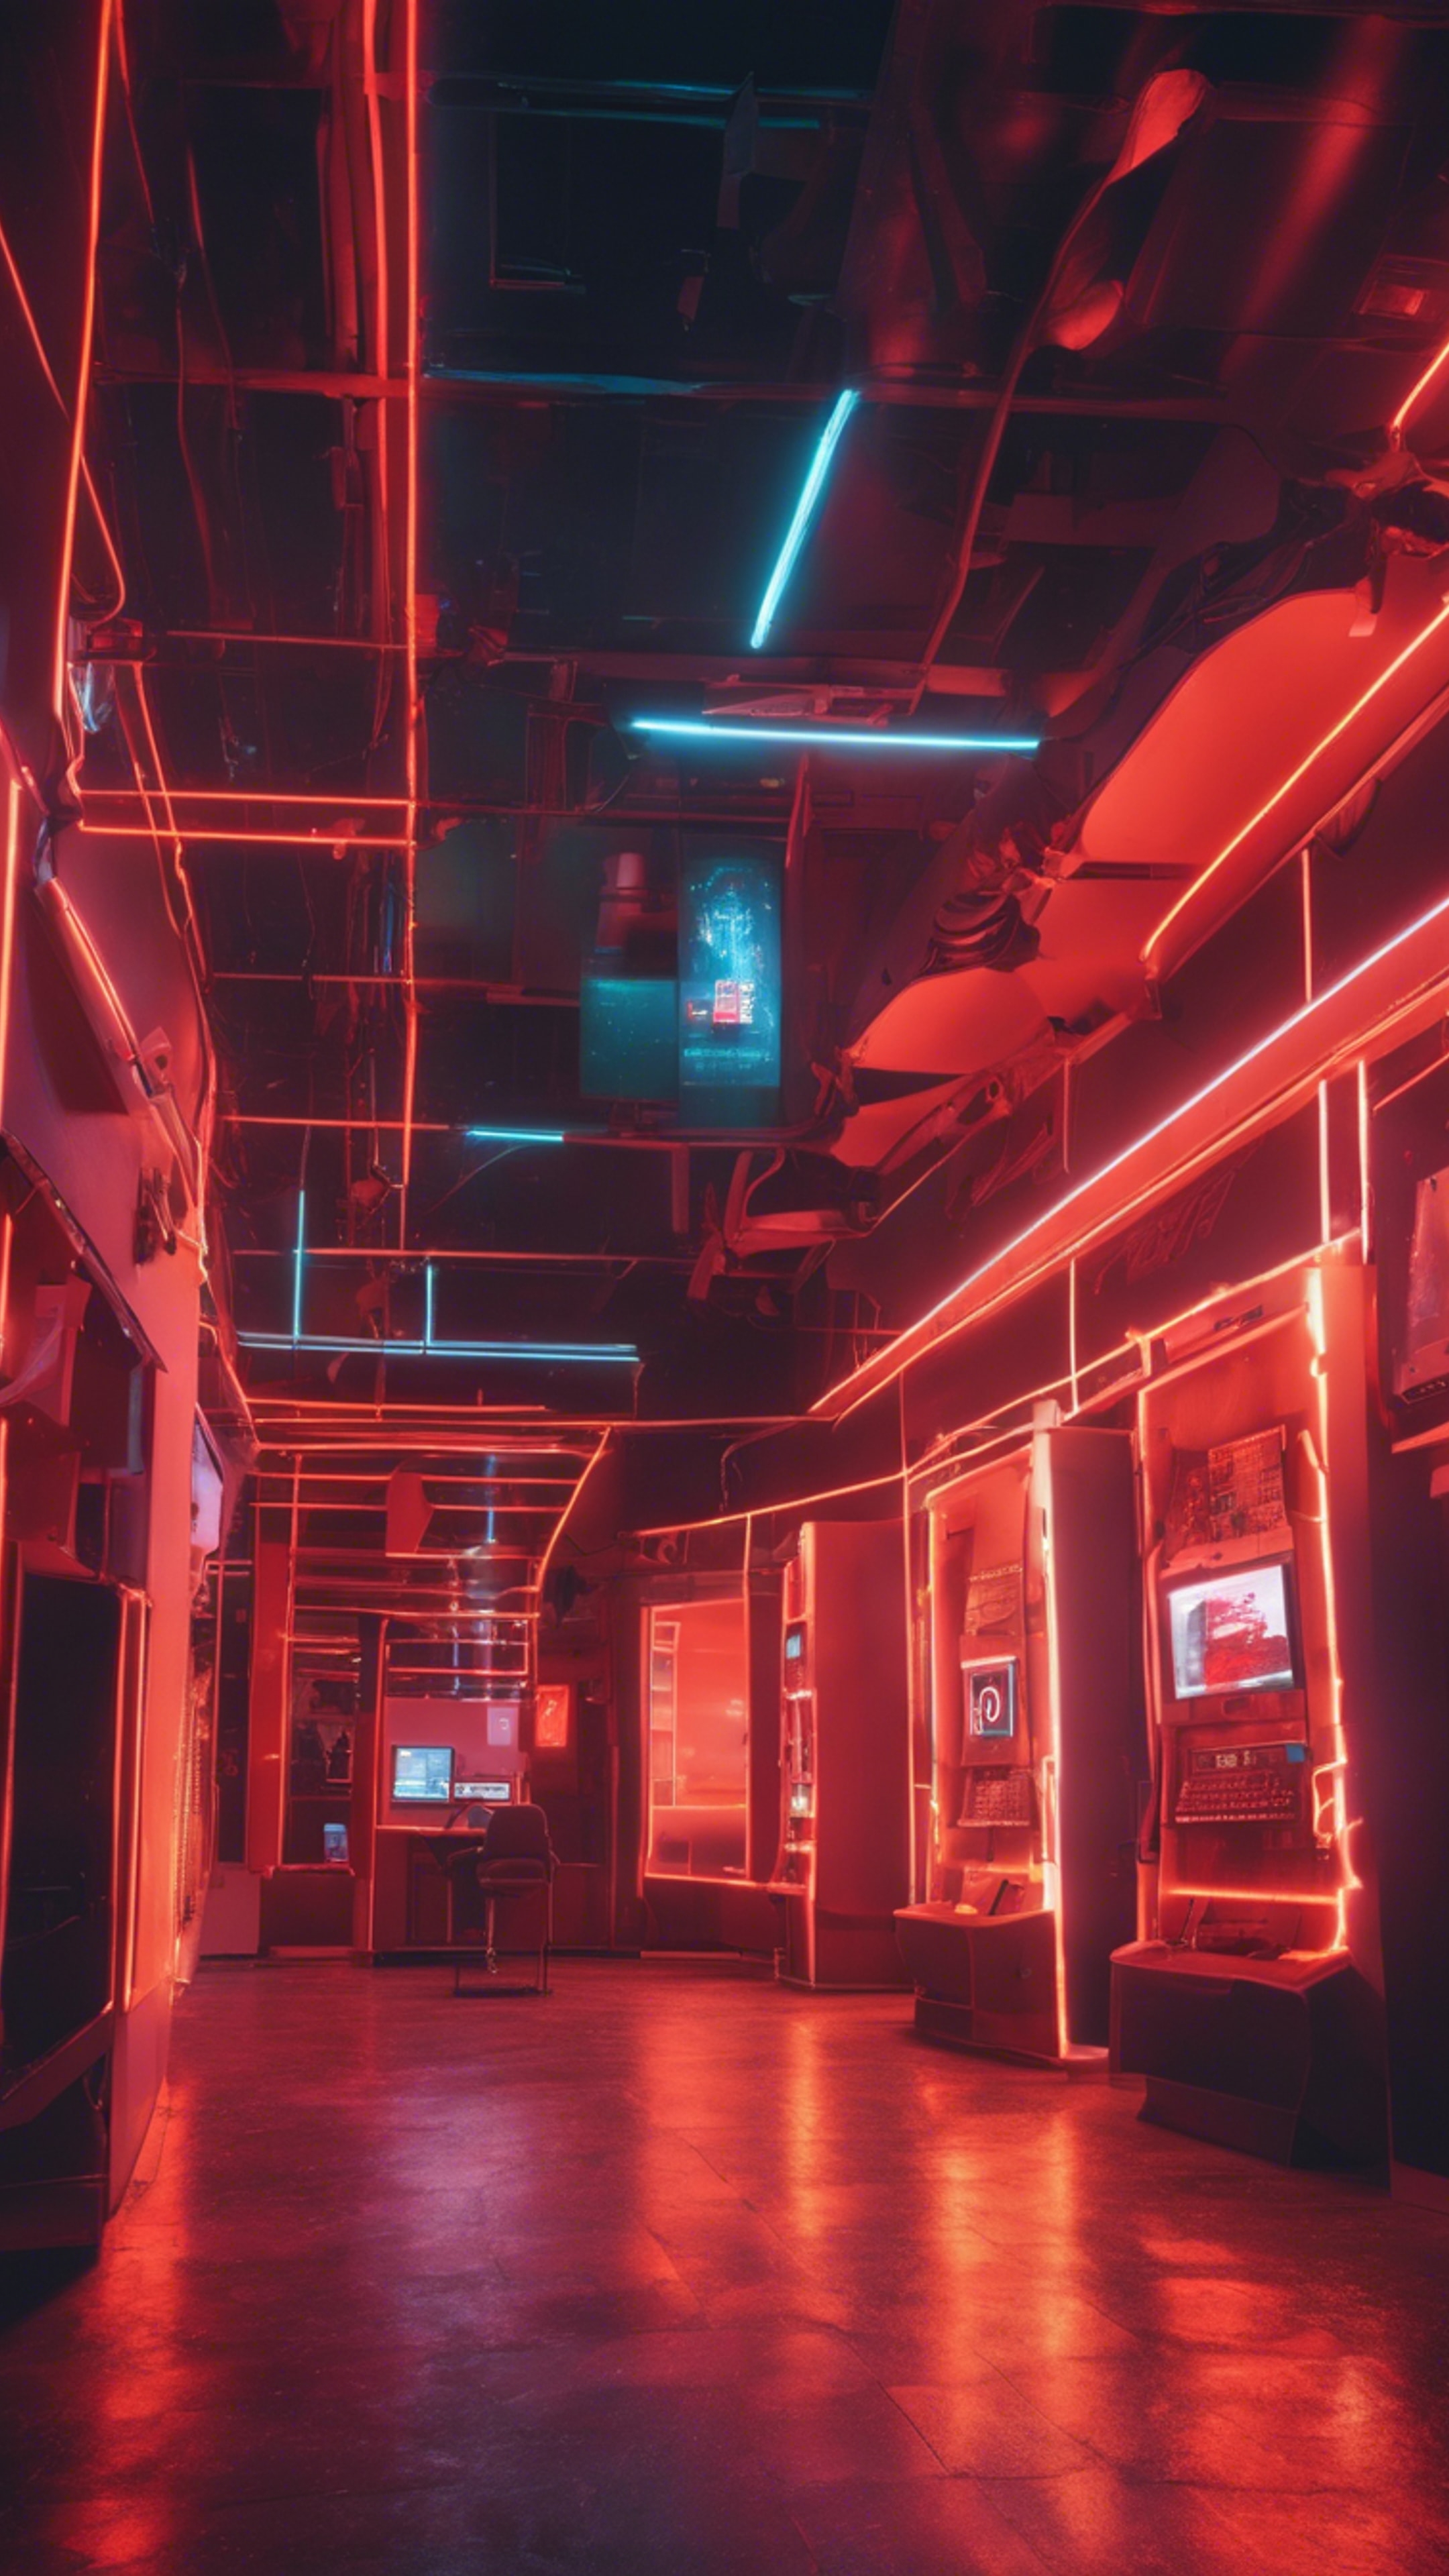 An architecturally unique cyber cafe glowing with neon red and orange lights at night. Wallpaper[37c23e18da0f466d9ff8]